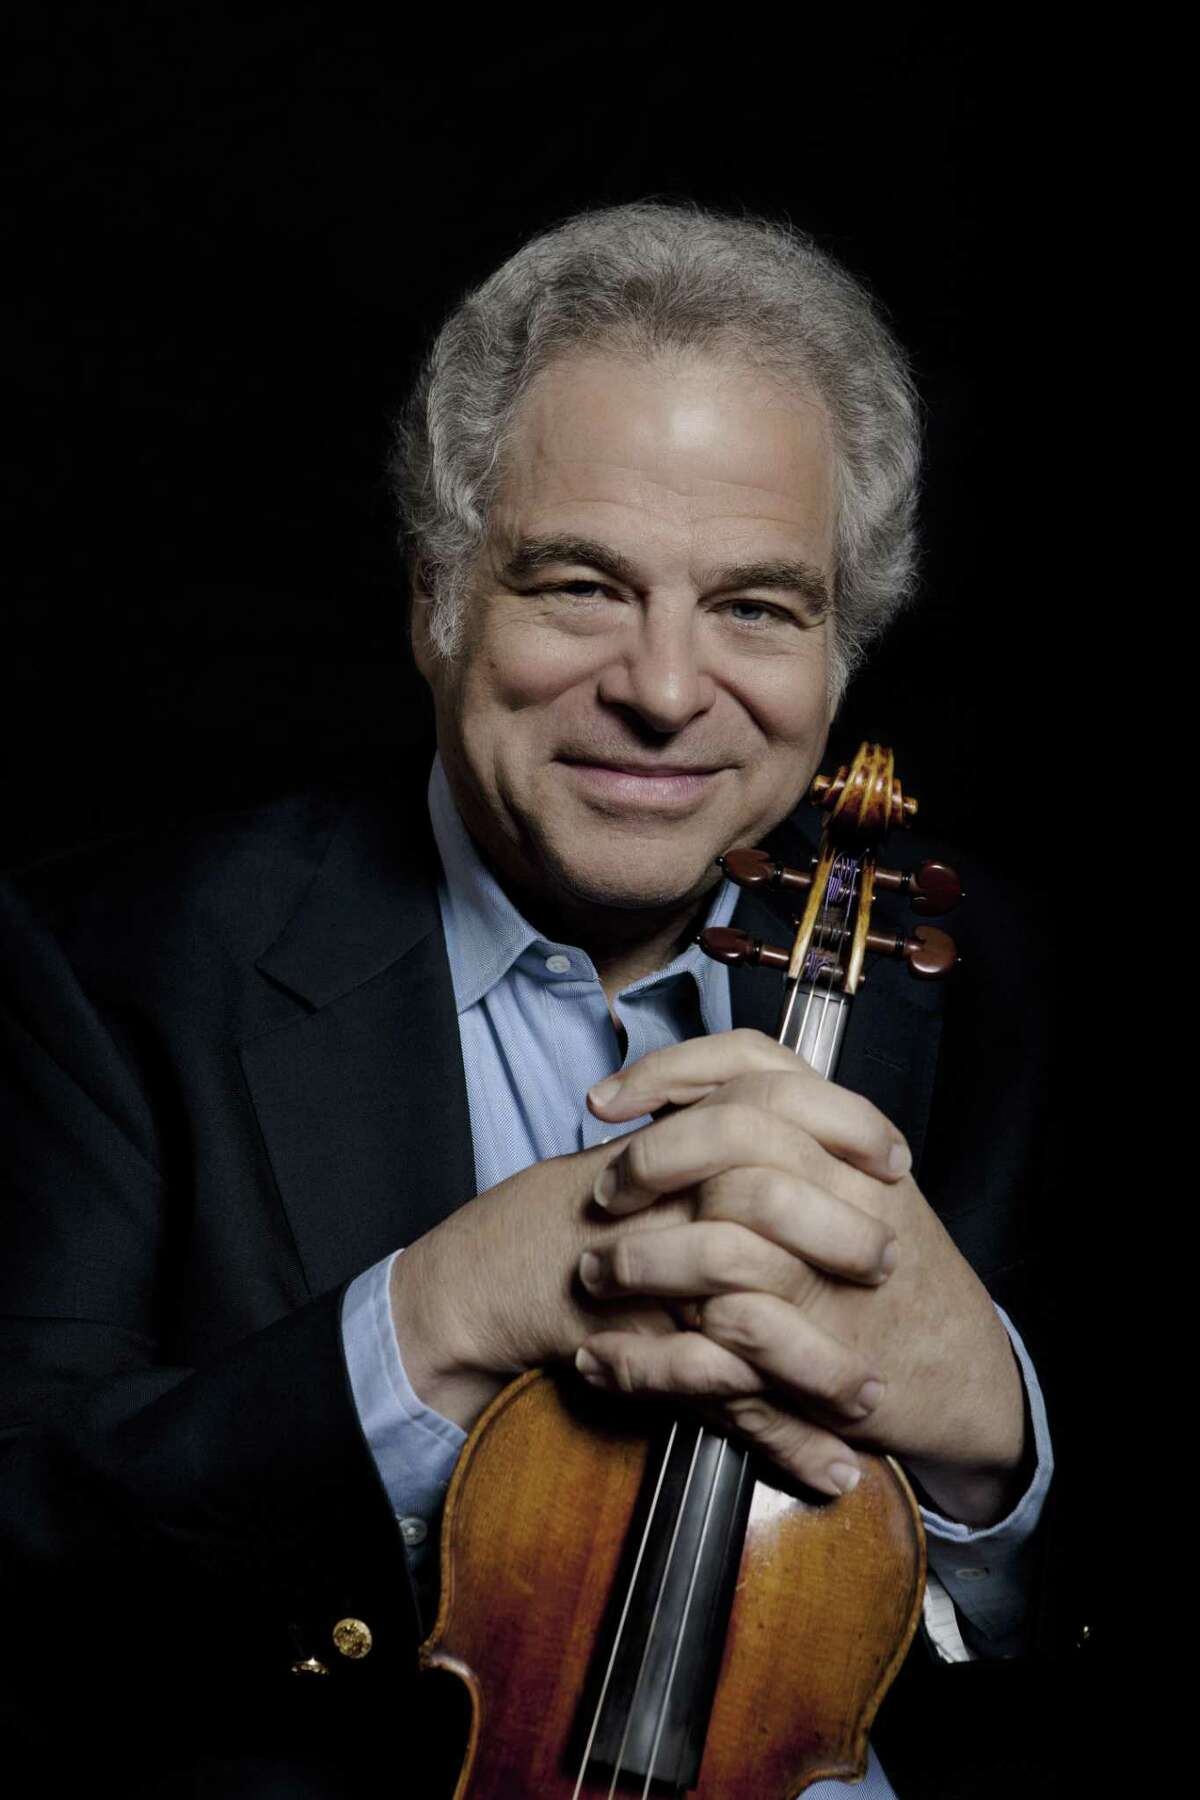 Violinist and conductor Itzhak Perlman